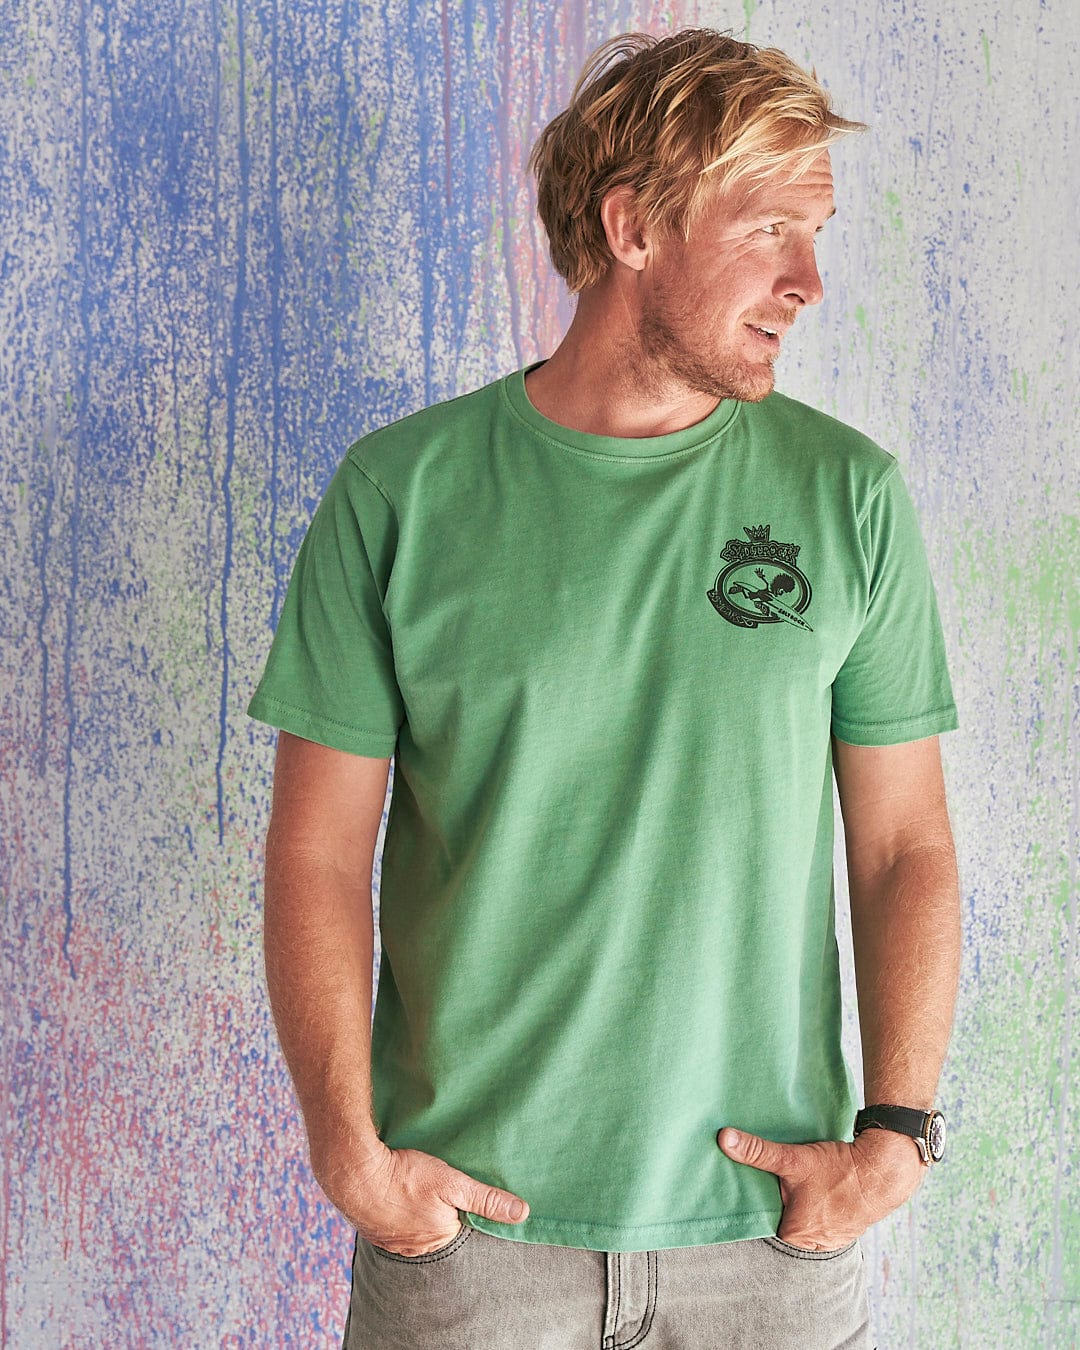 A man wearing a Little Creatures - Limited Edition 35 Years T-Shirt by Saltrock standing in front of a colorful wall.